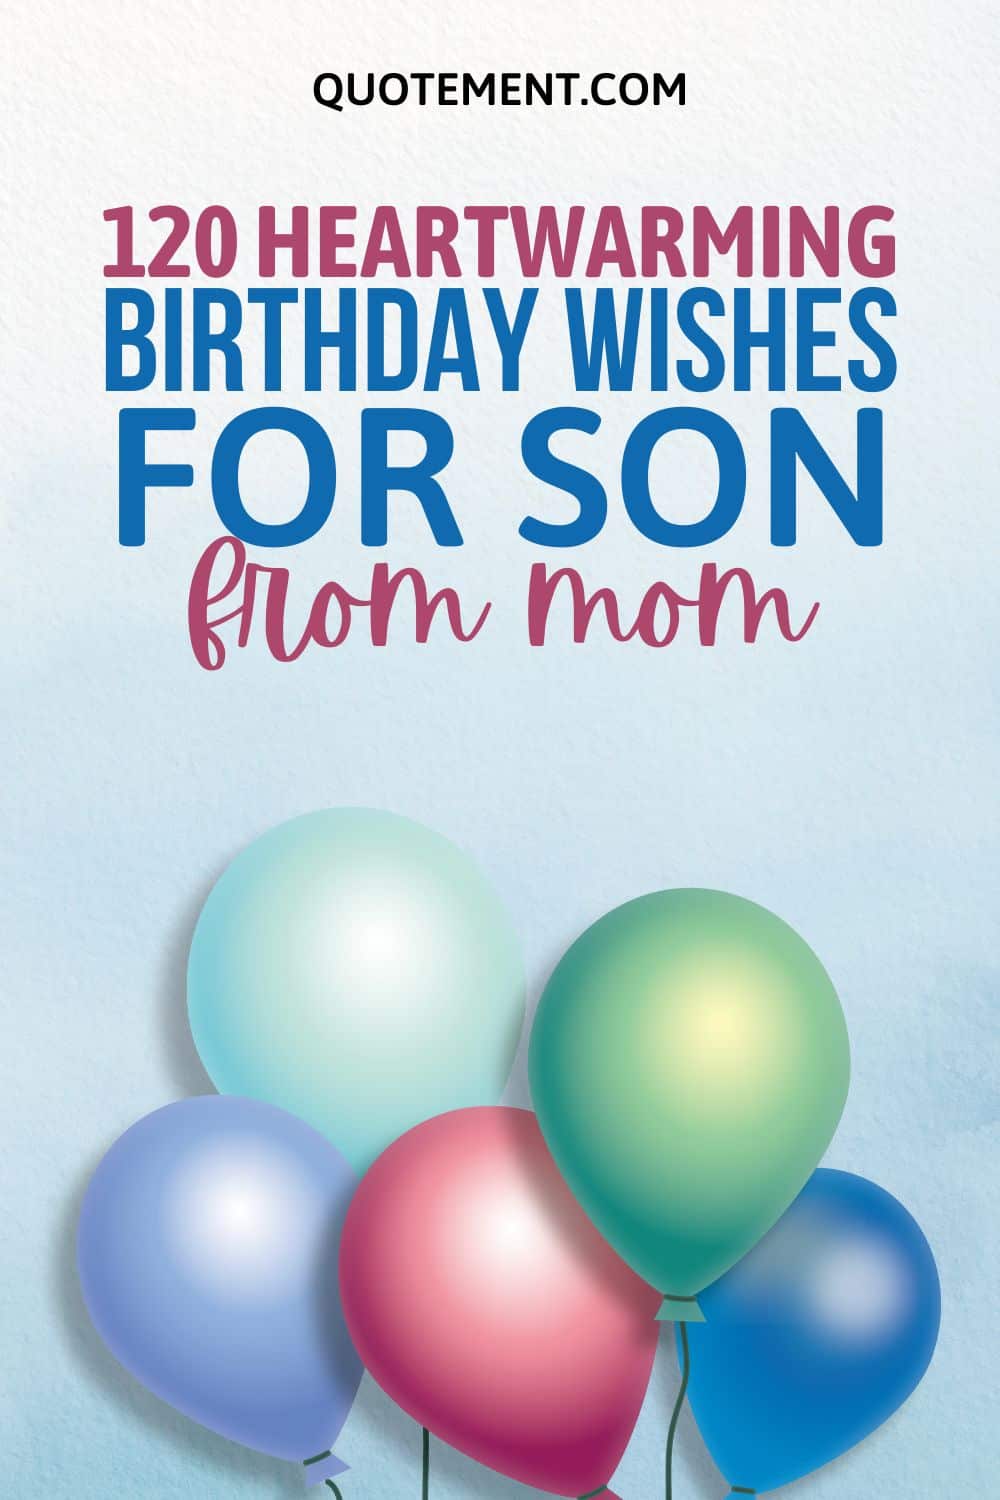 120 Sweet & Emotional Birthday Wishes For Son From Mom